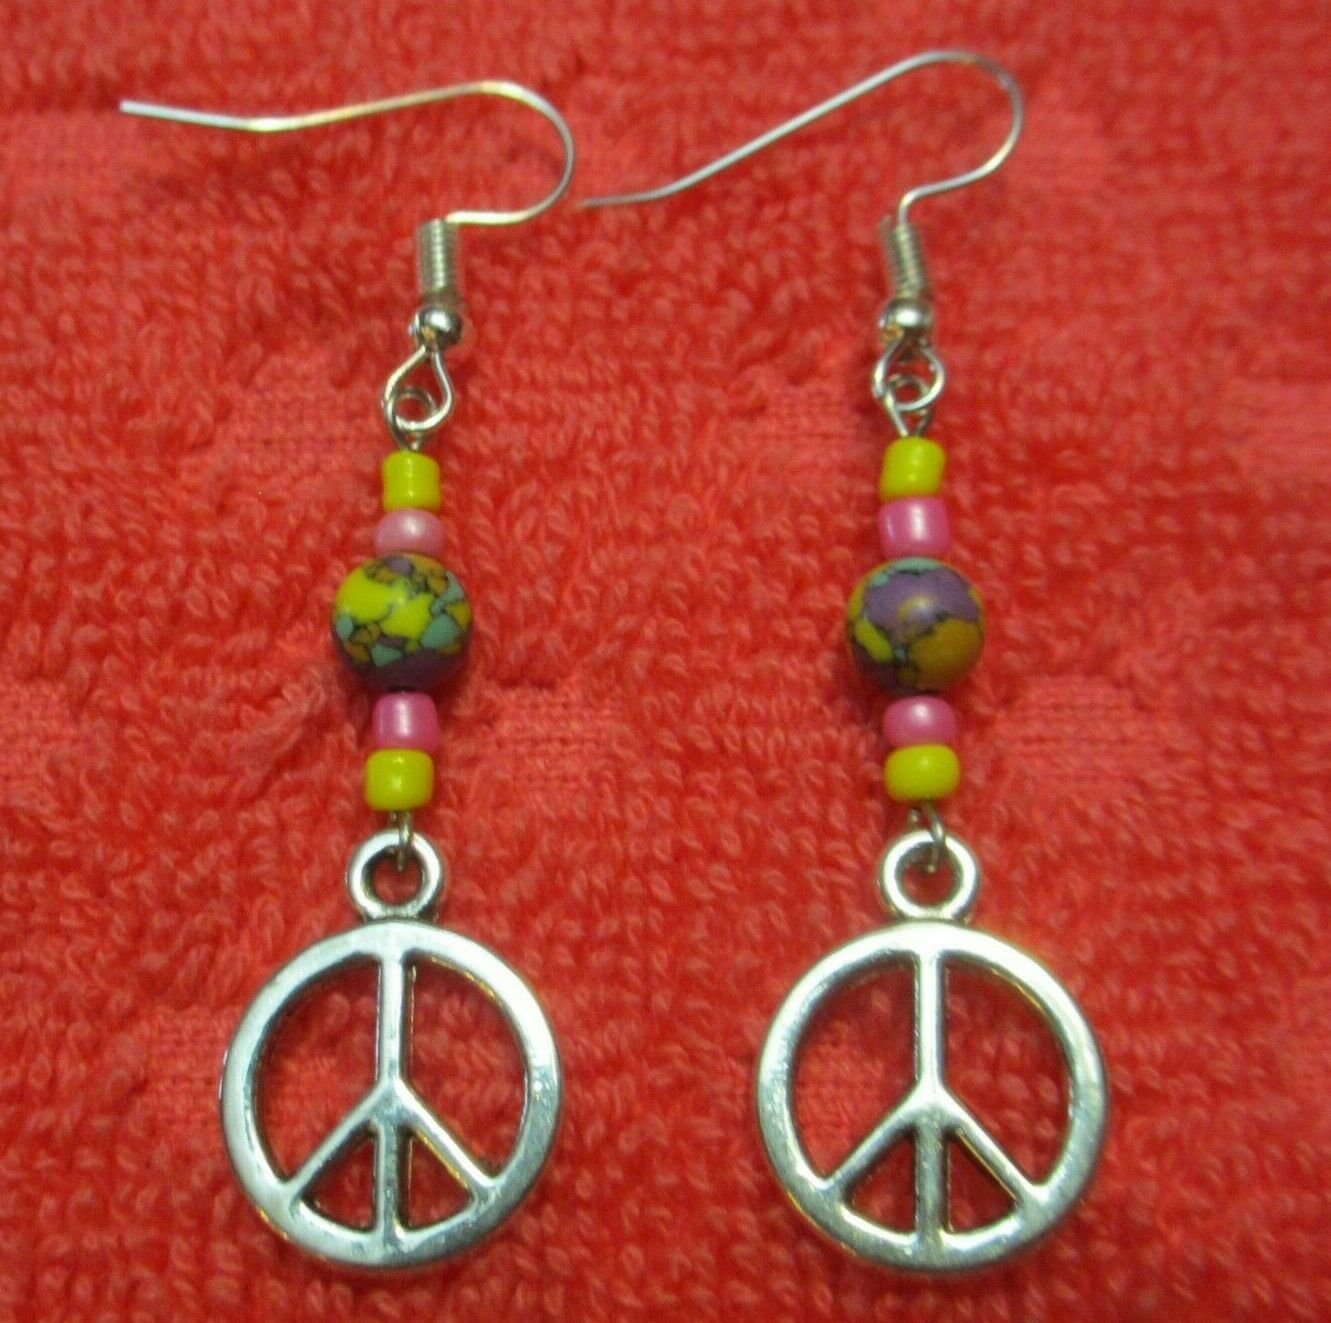 PEACE SIGN EARRINGS - Small Size .56" w Bubble Gum Beads - Cute Hippie Jewelry